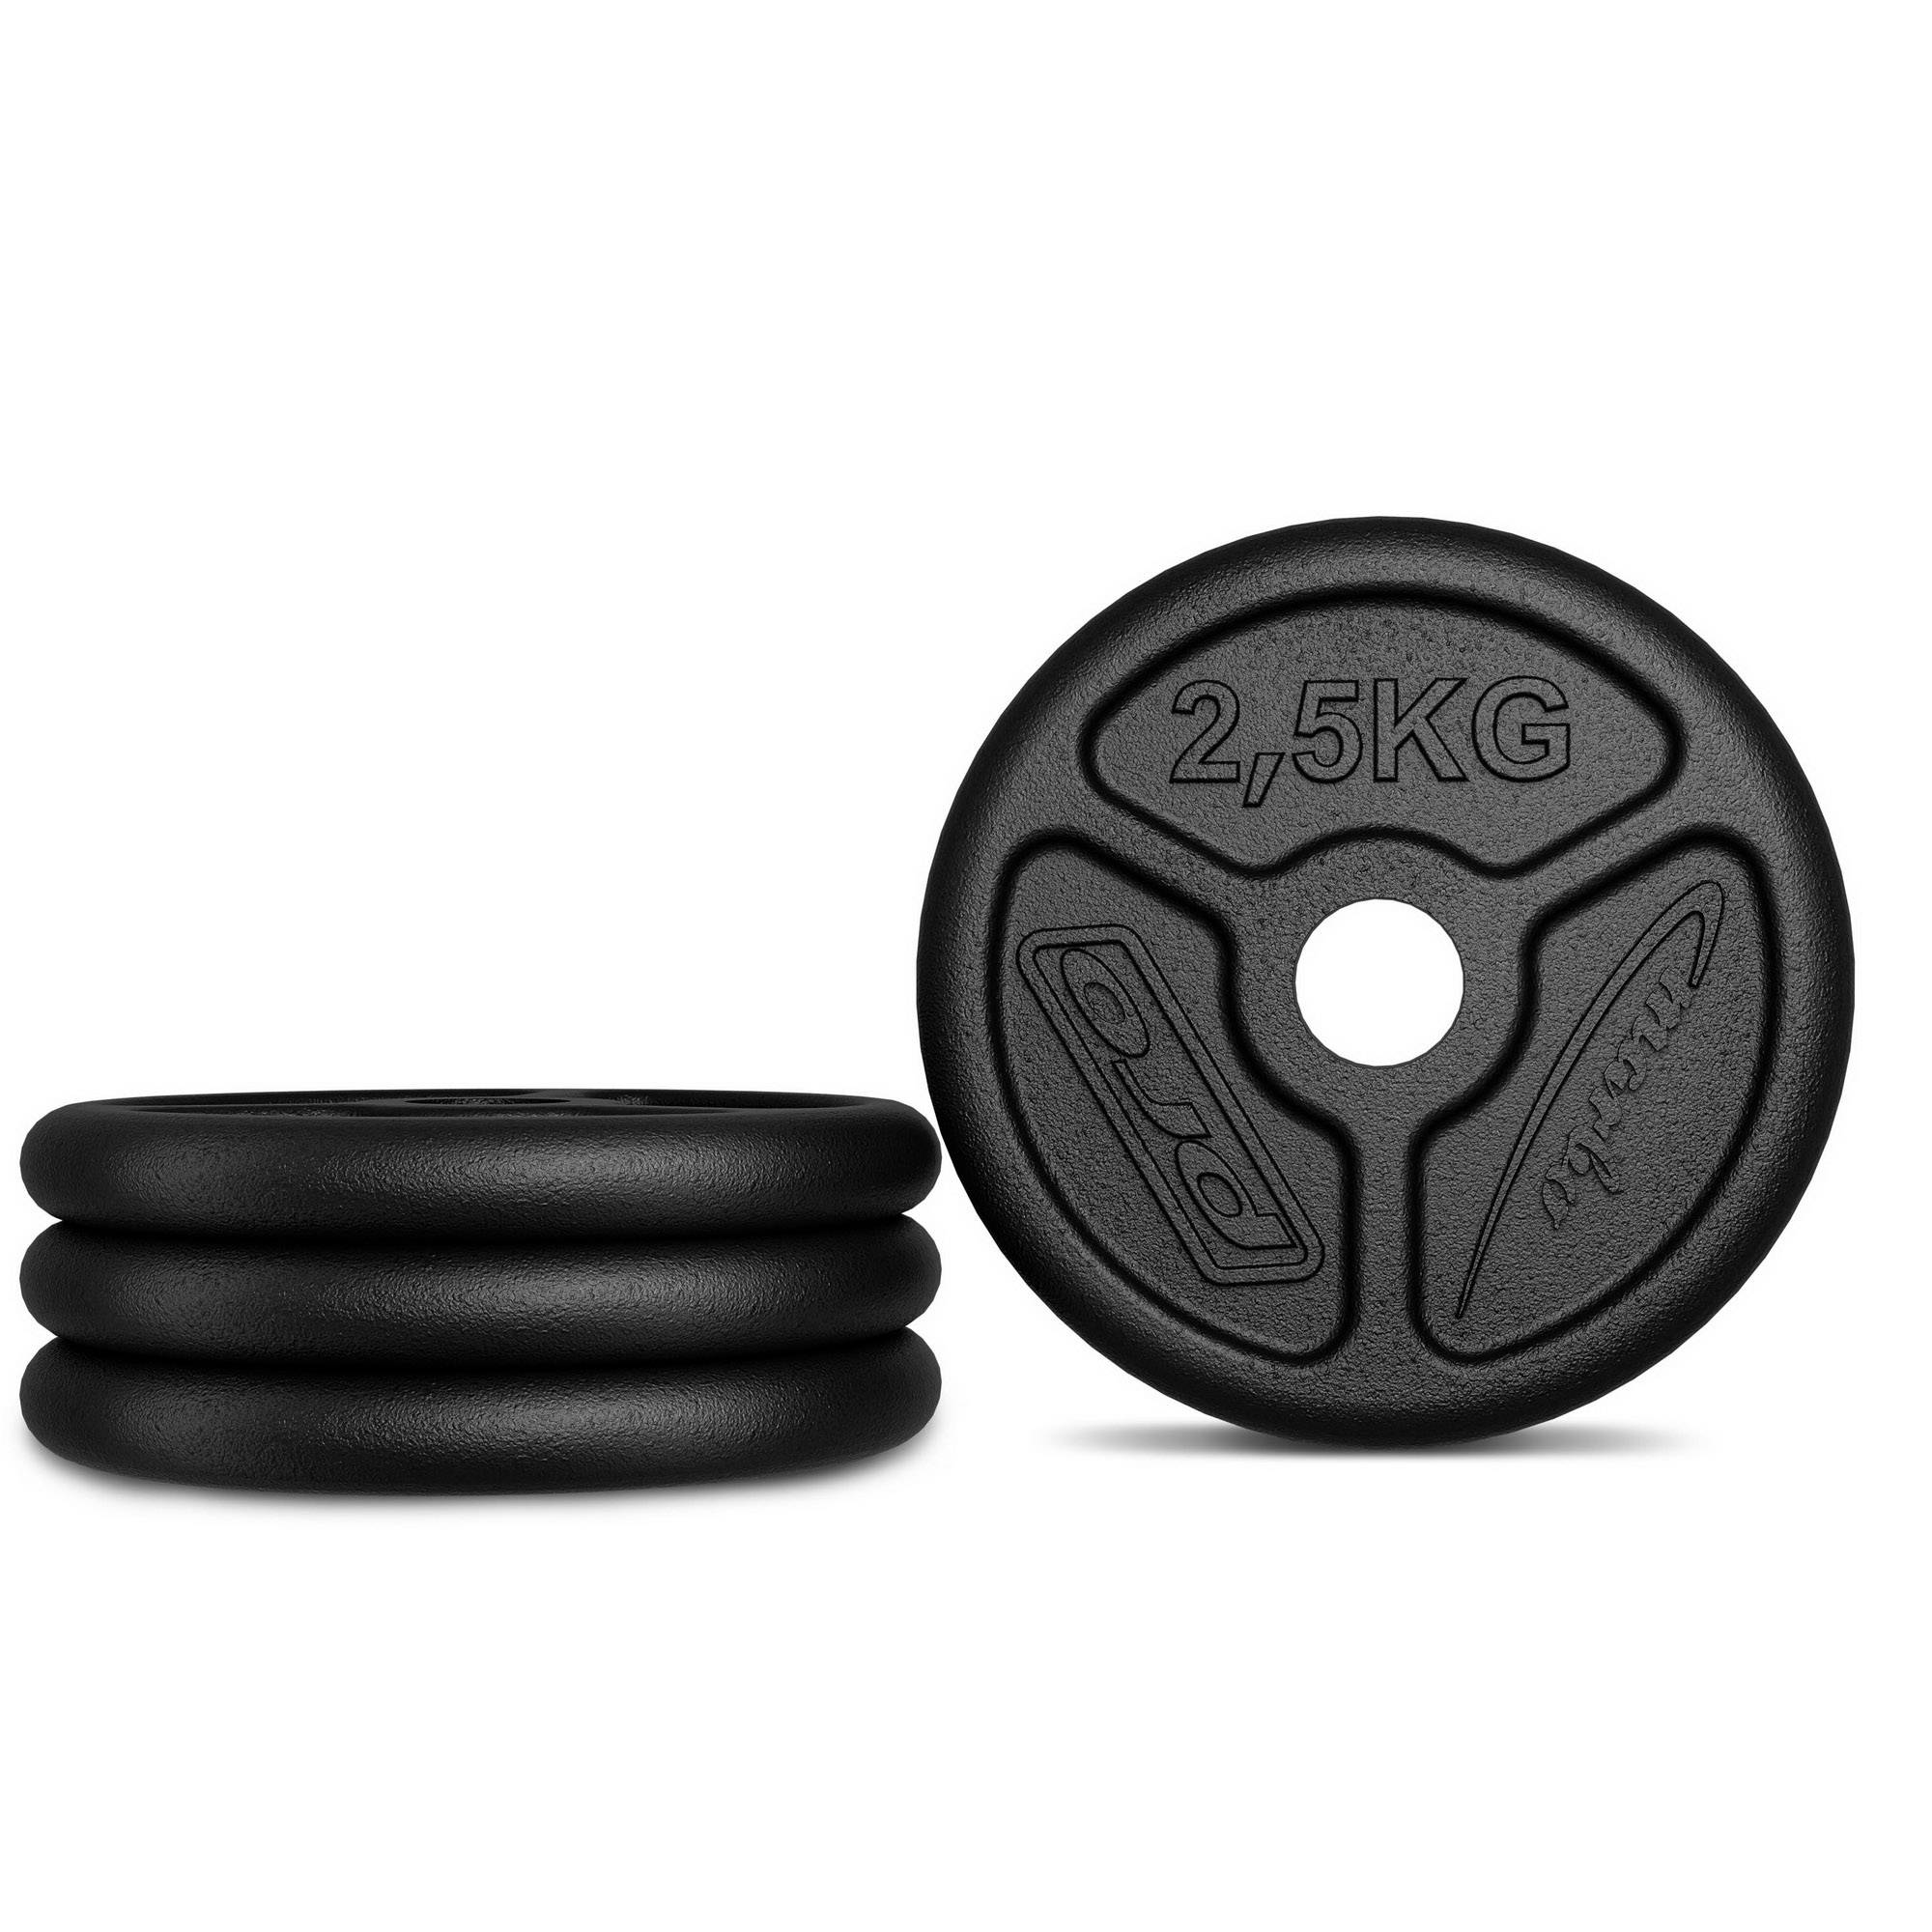 \\ 2.5 ø31 discs Standard and kg plates 2023 bore Weight \\ with slim weight Weight Cyber Sport plates 2,5 - Marbo kg mm Plates Black MW-O2,5-slim Week | Week Standard iron 2023 Bars